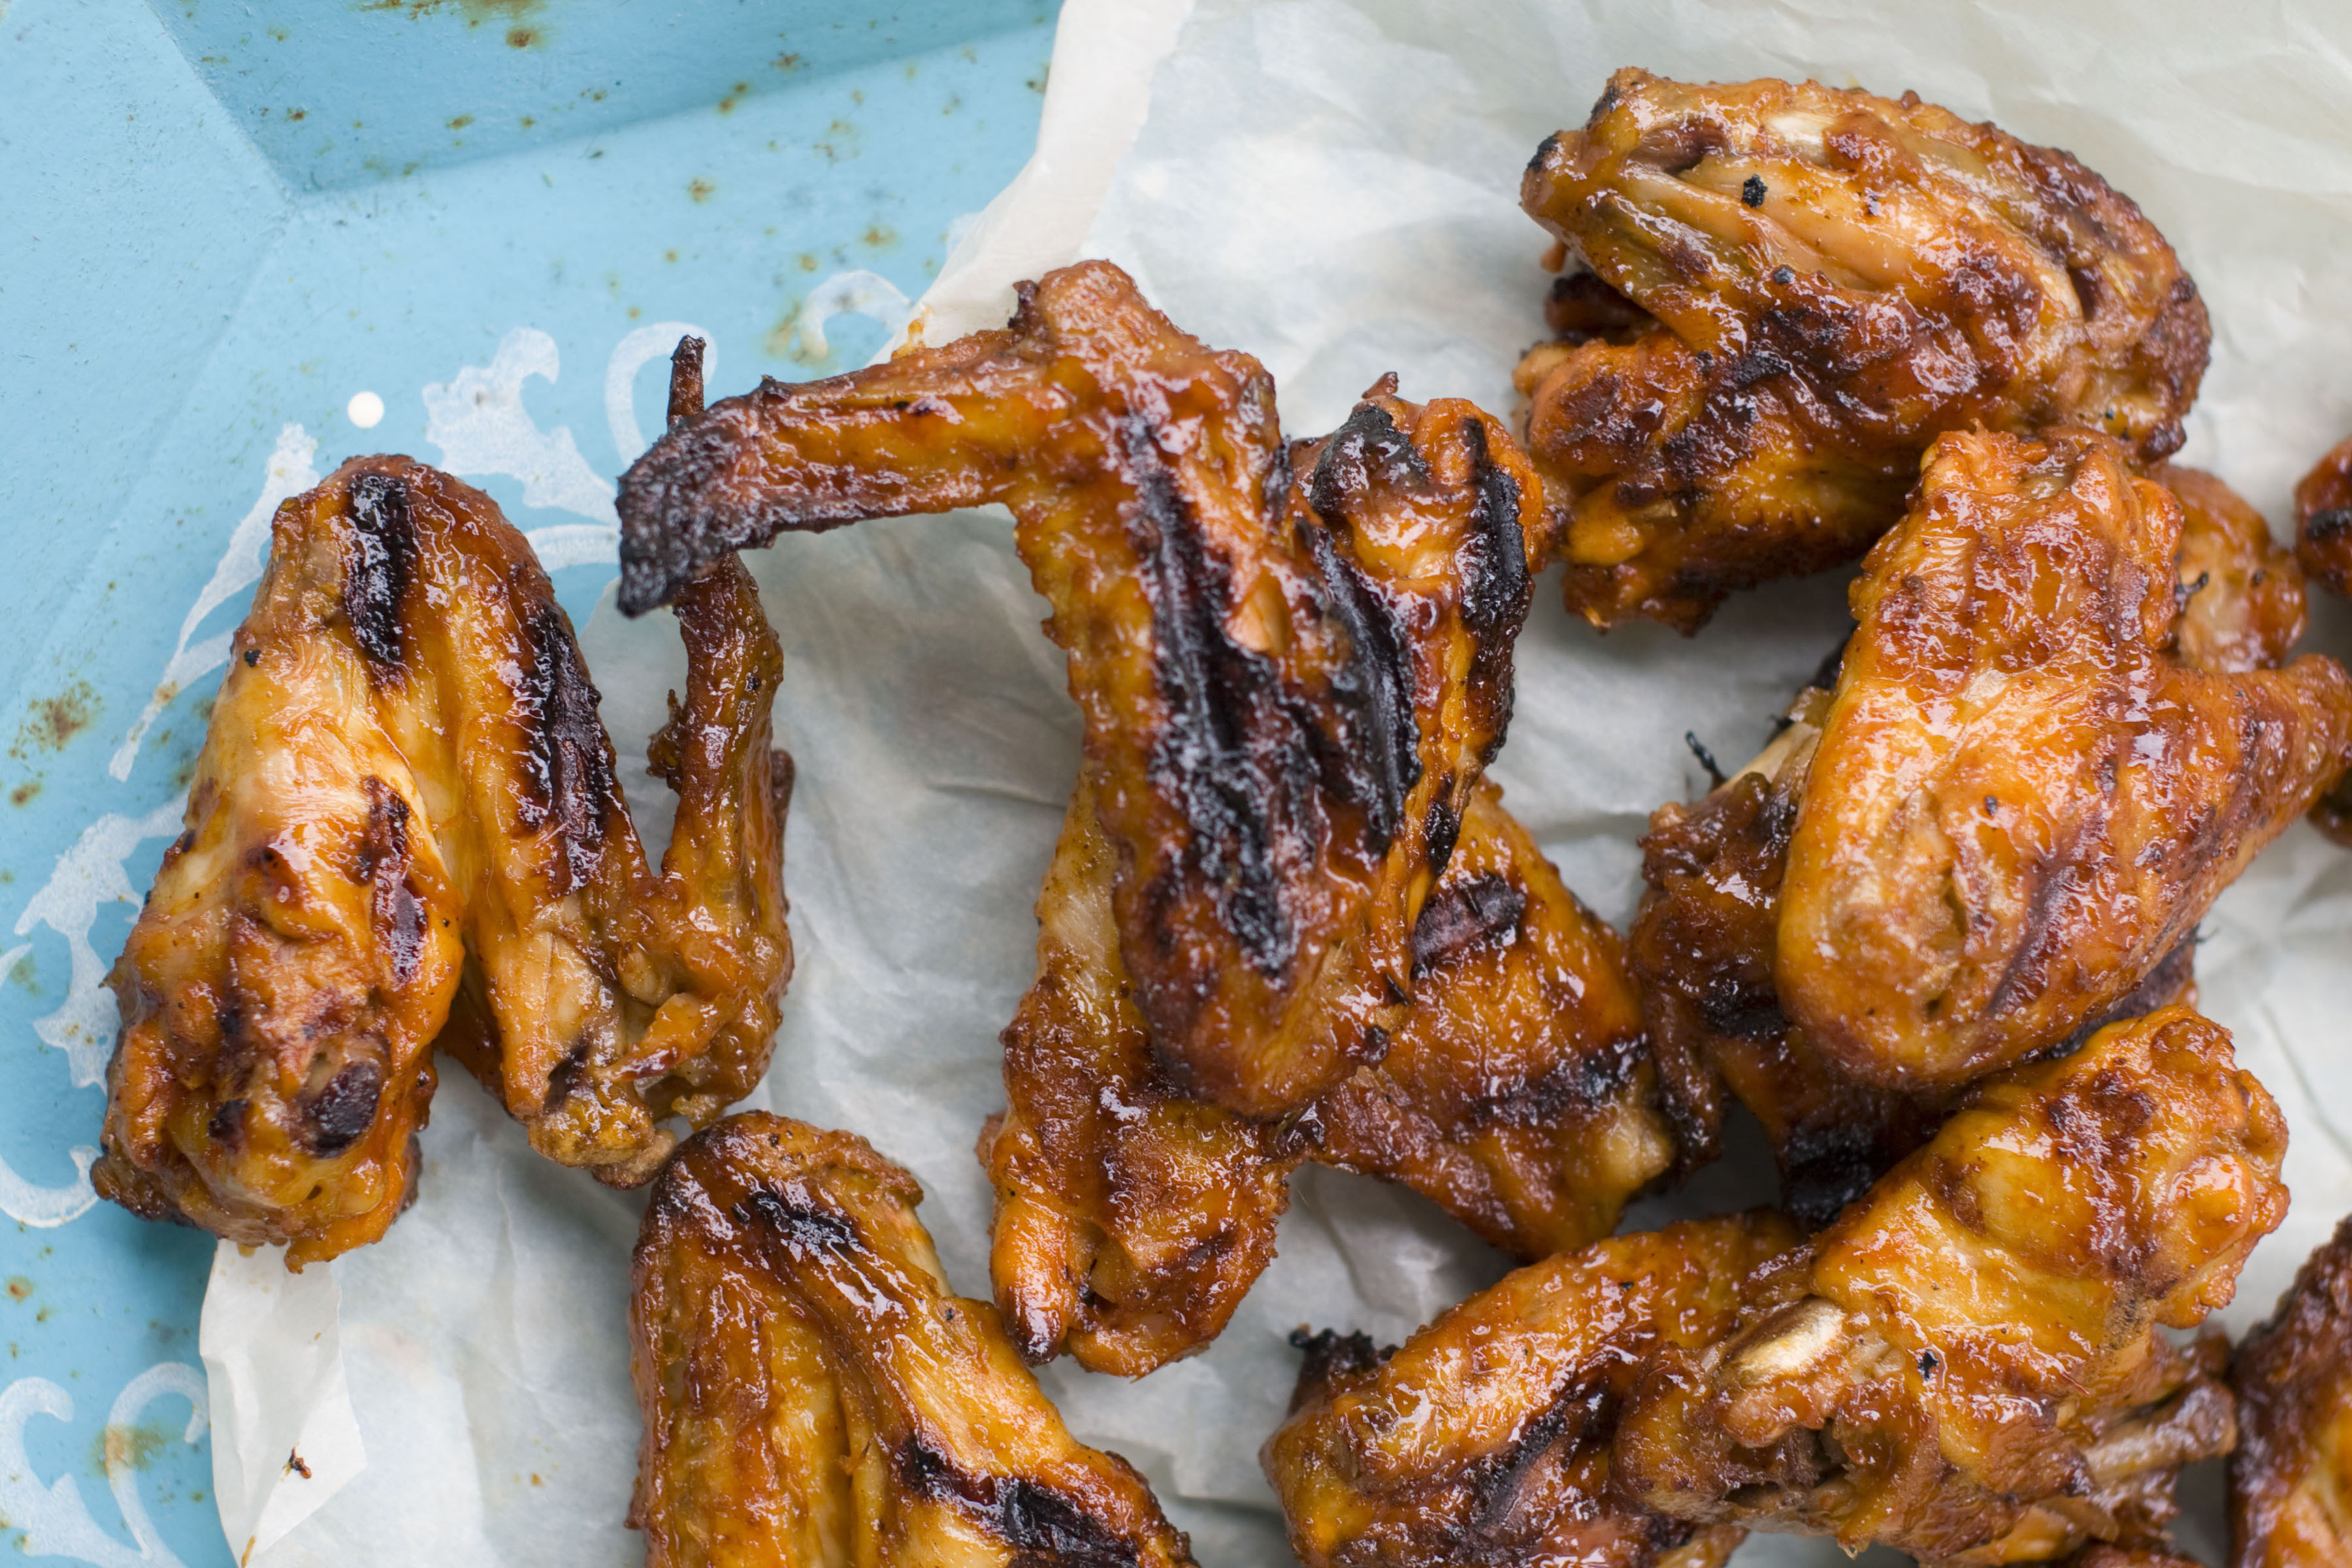 Super Bowl Sunday promises a blitz on chicken wings